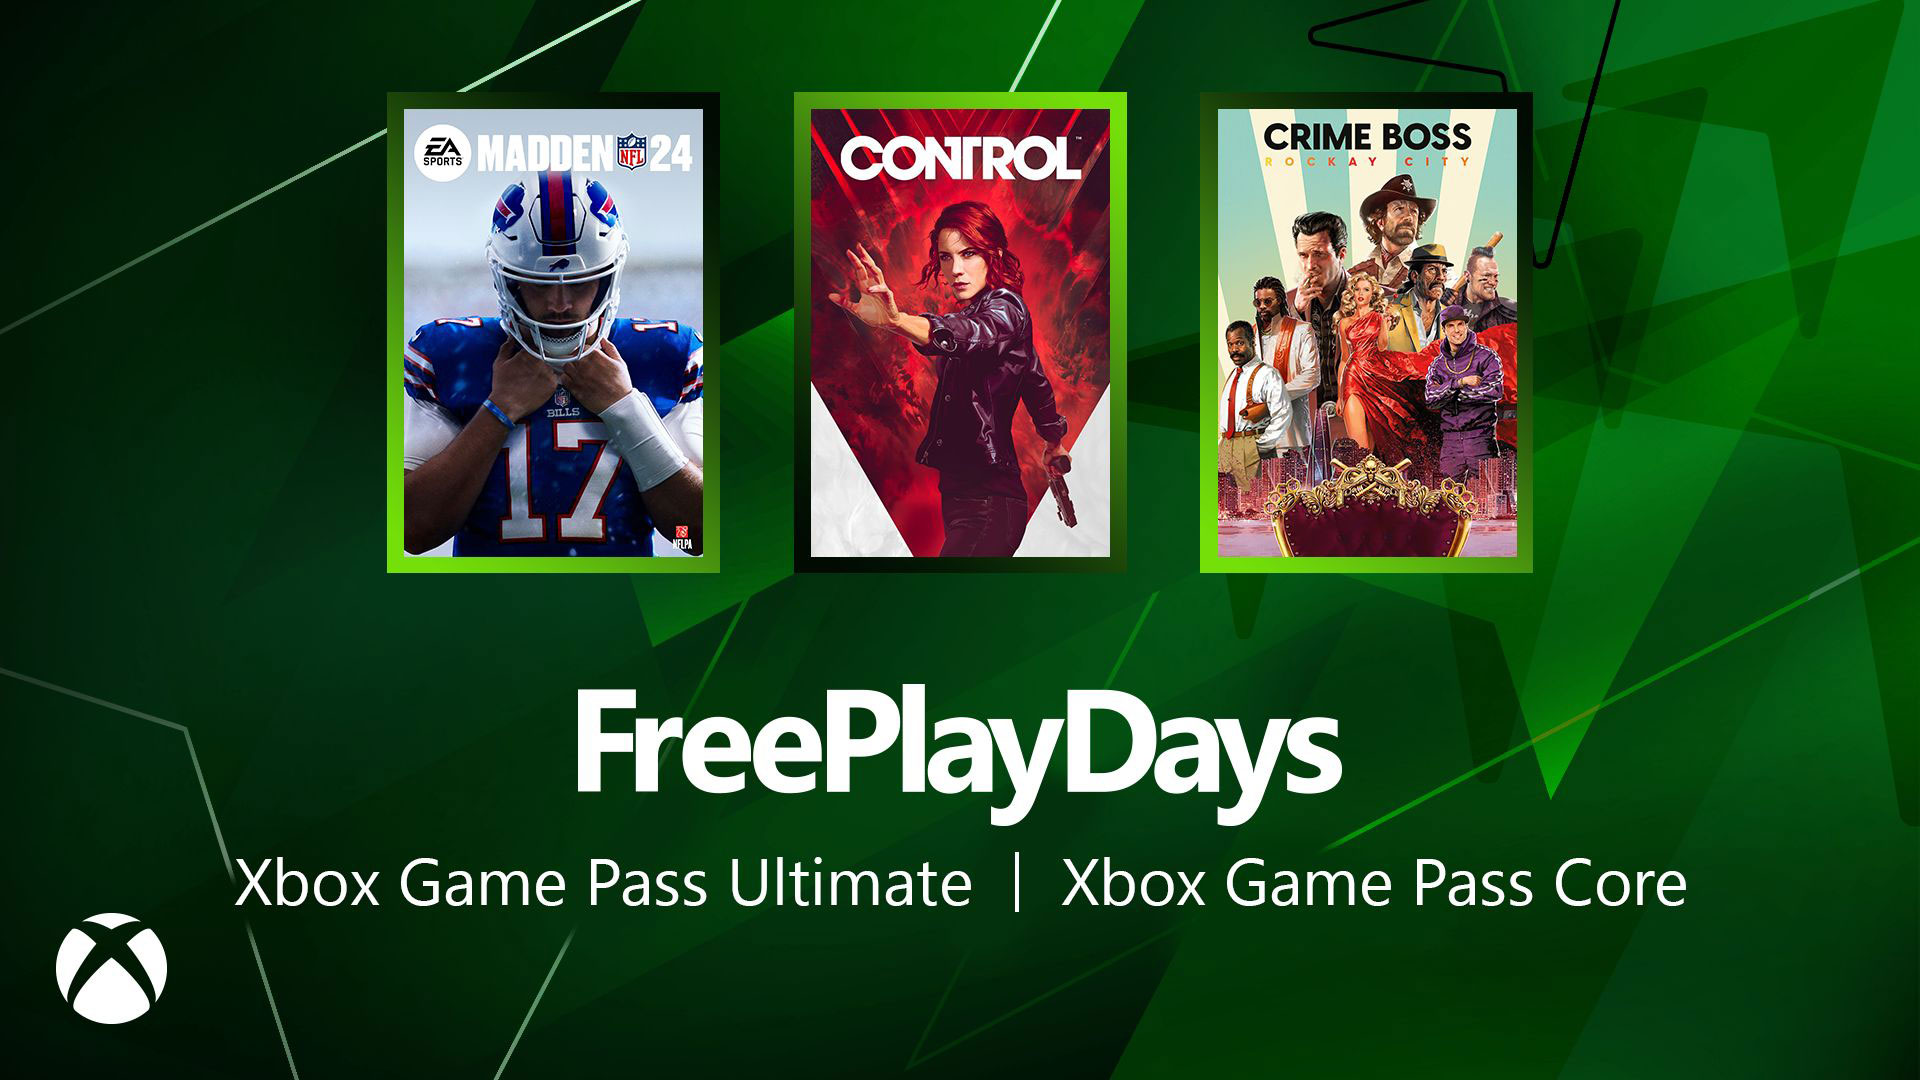 Madden NFL 24, Control, and Crime Boss: Rockay City are free to play this weekend for Xbox Live Gold and Xbox Game Pass Ultimate subscribers